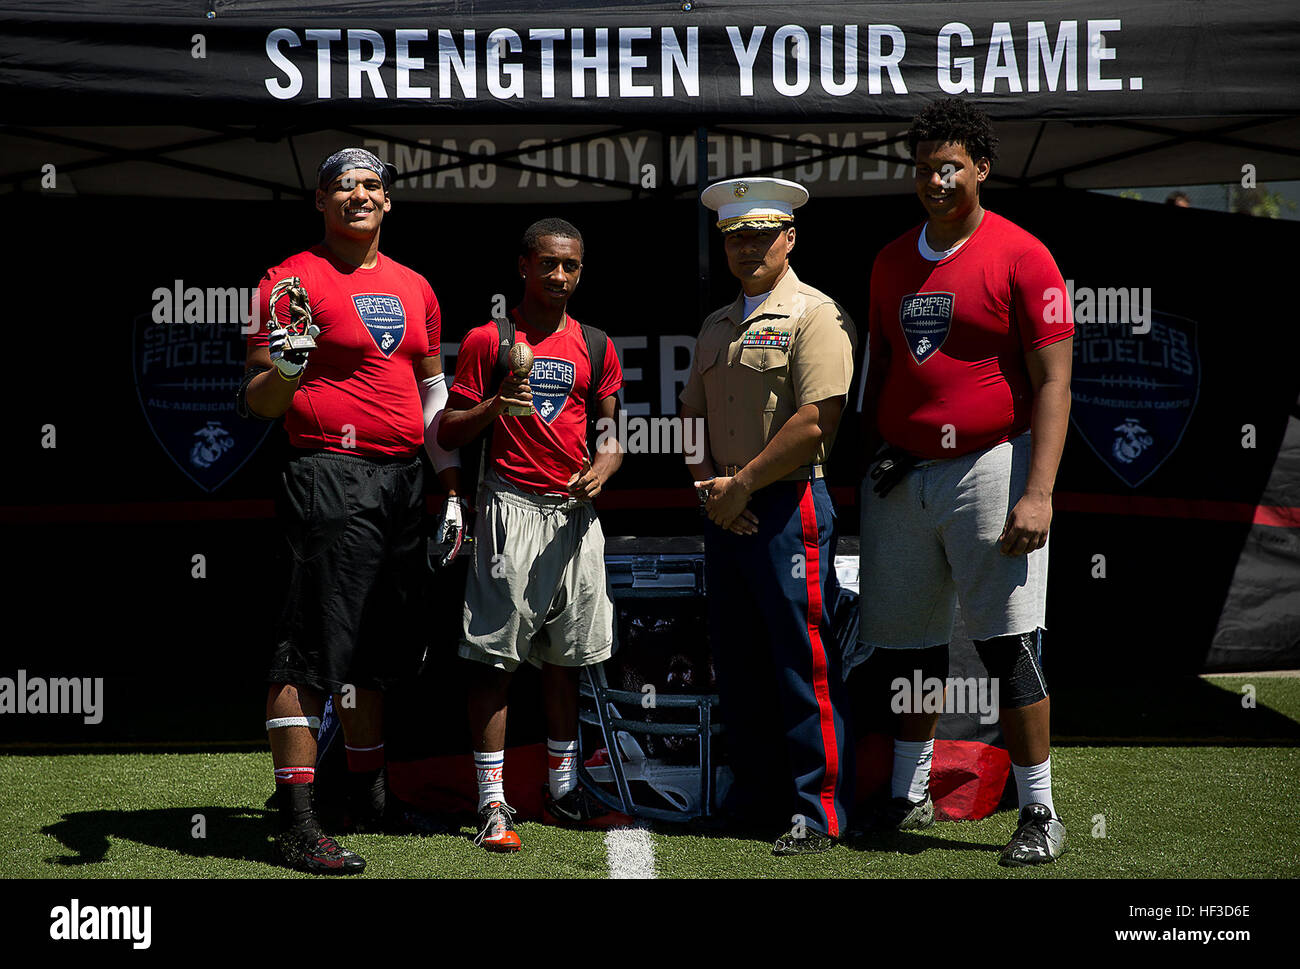 Maj. Sung Kim, the commanding officer of Marine Corps Recruiting Station Seattle, presents awards to Avyion Fisher (left) from Bethel High School; Emmanuel Wells (center) from Rainier Beach High School; and Taven Erpenbach (right) from Gig Harbor High School following a Semper Fidelis All-American football camp at Hazen High School in Renton, Washington, June 14, 2015. More than 160 players from across Washington State experienced the one-day camp, led by former NFL coaches, local high school coaches and Marines. The camp, which focused on leadership and honor both on and off the field, leads  Stock Photo